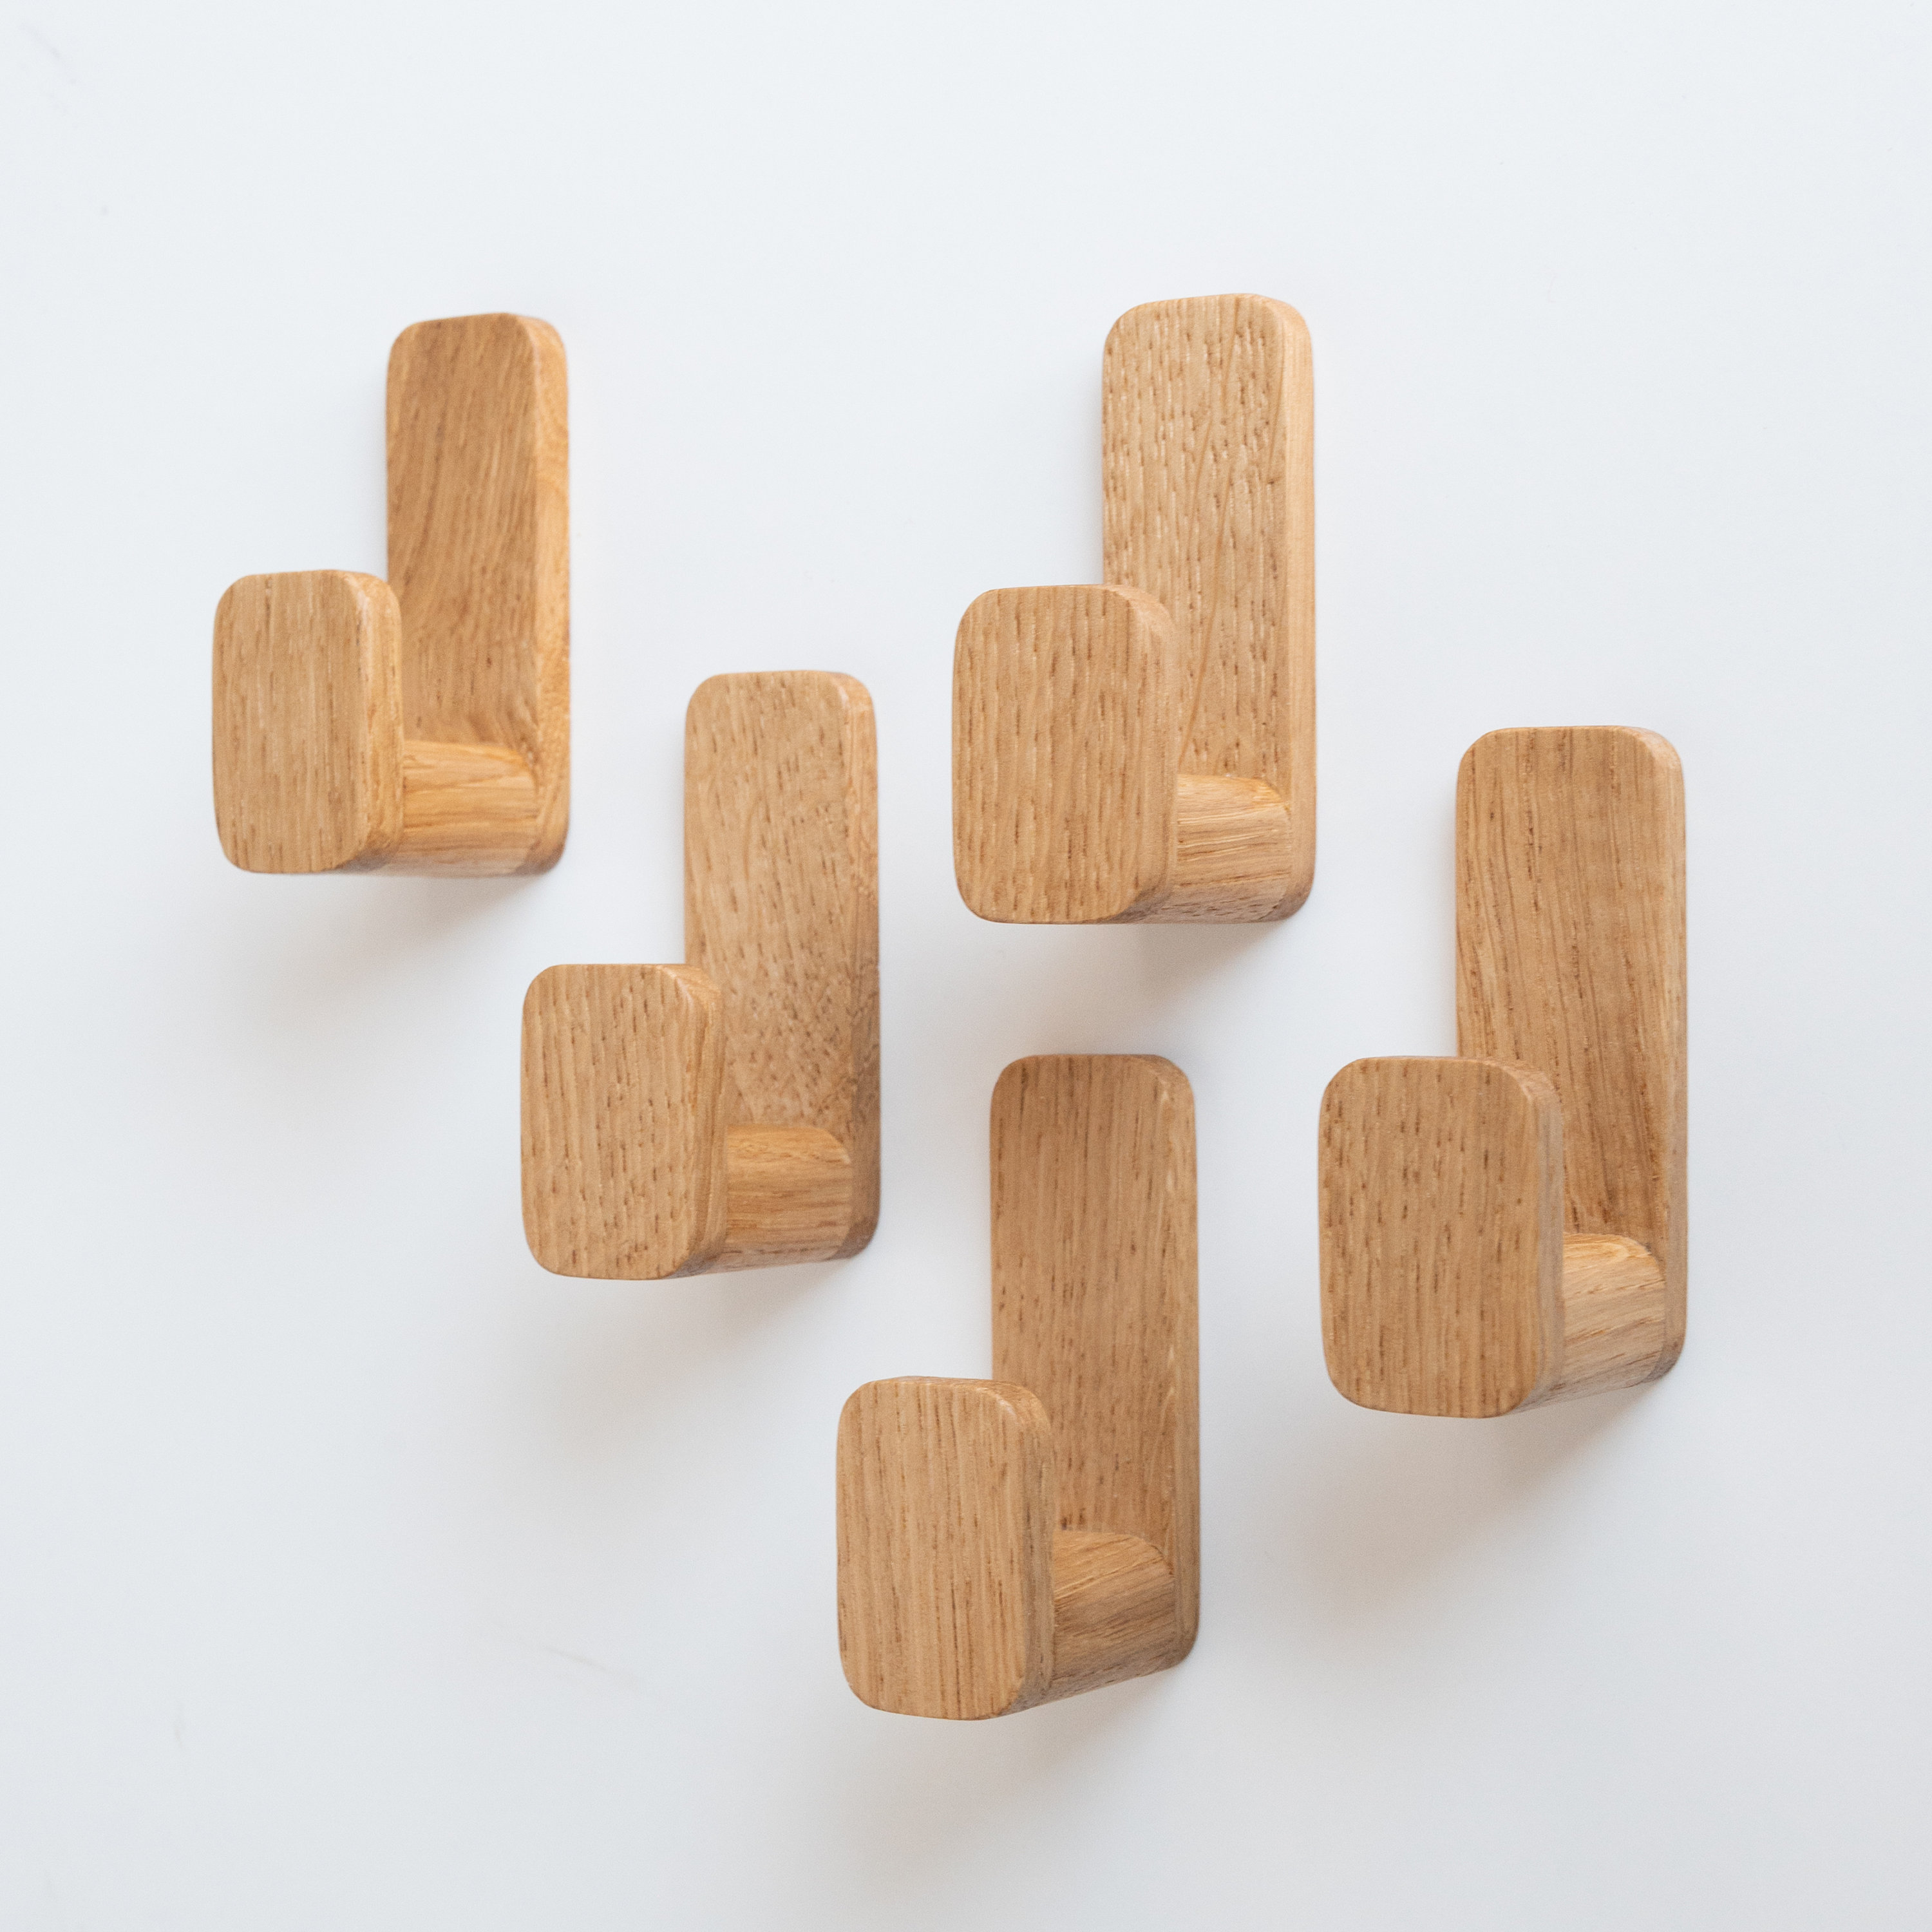 Self-adhesive Oak Wooden Rounded Wall Hooks Sets, Danish Oil